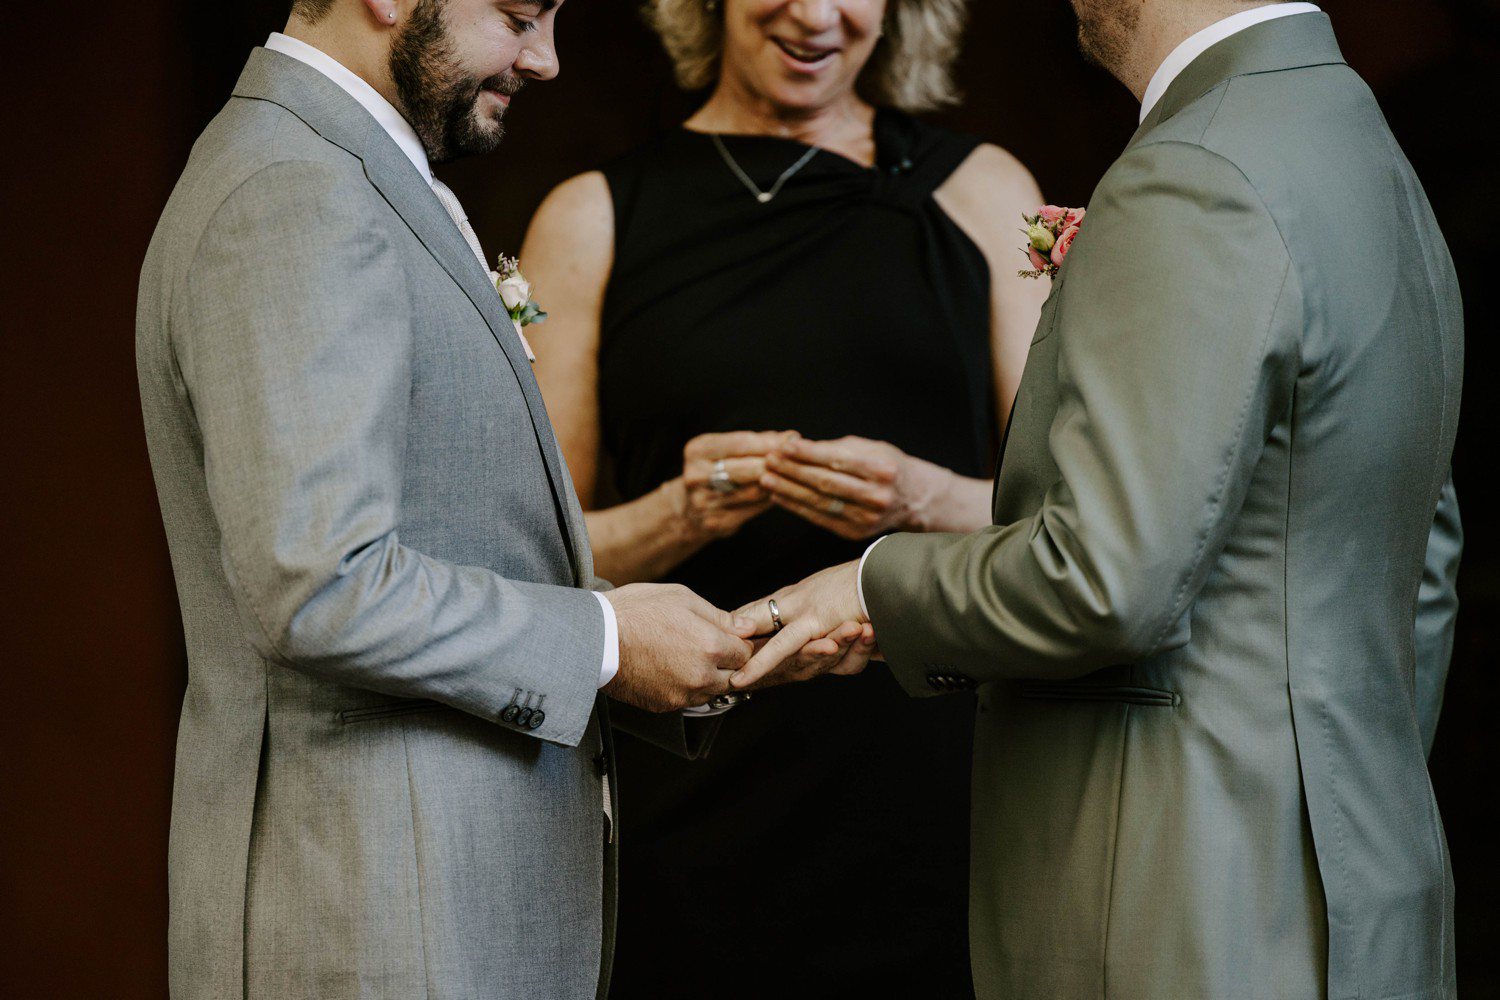 Grooms exchanging wedding rings during wedding ceremony.